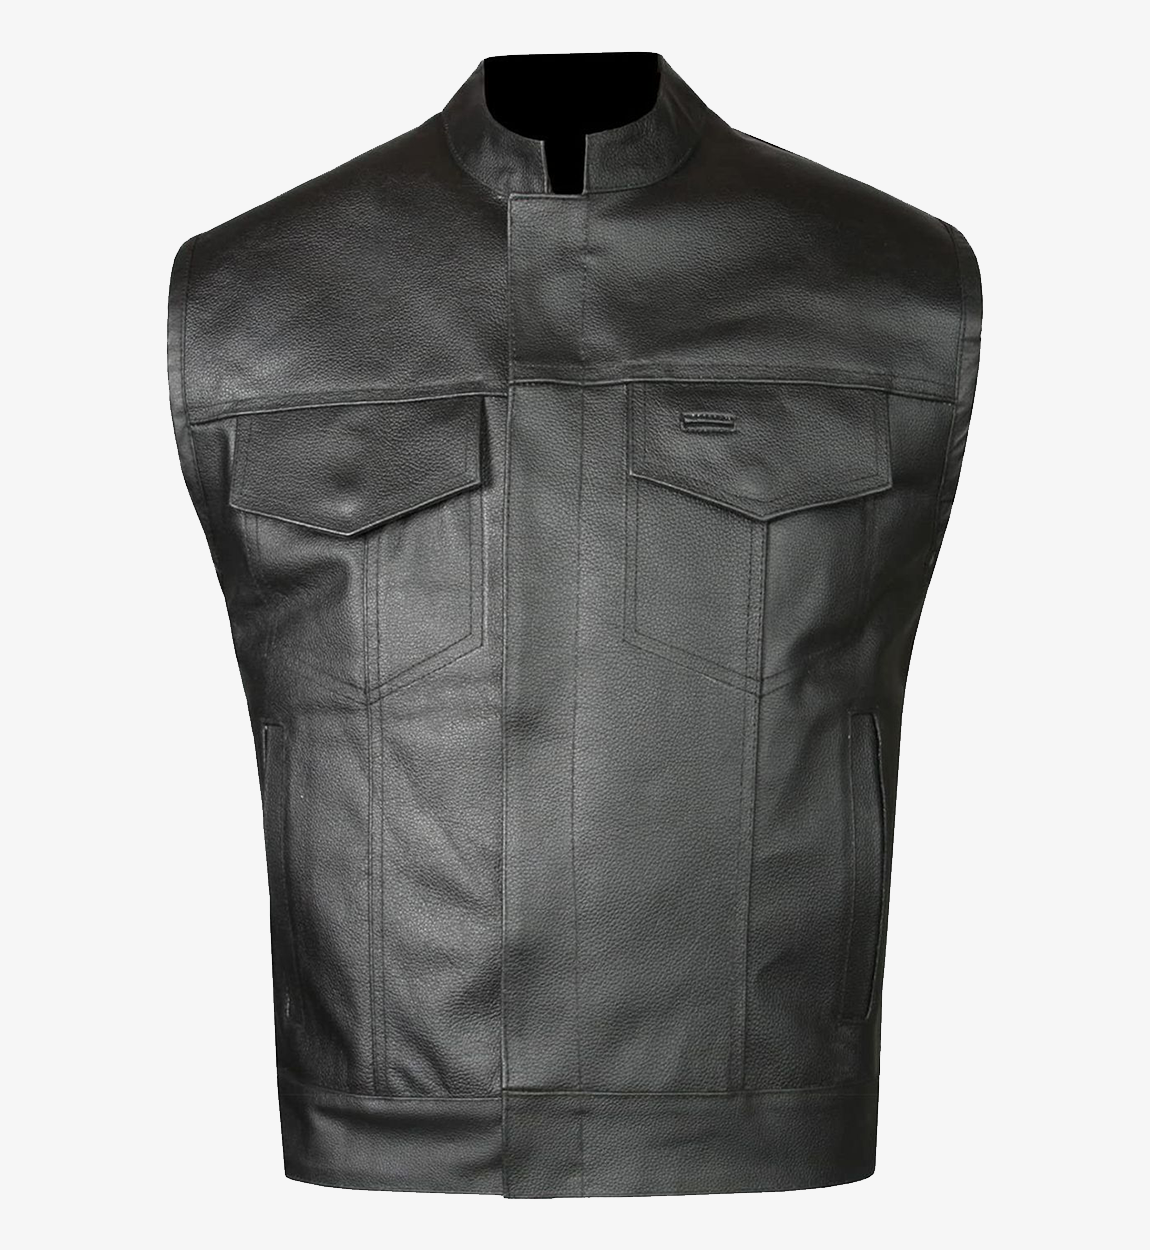 Men's Motorcycle Club Style Leather Vest